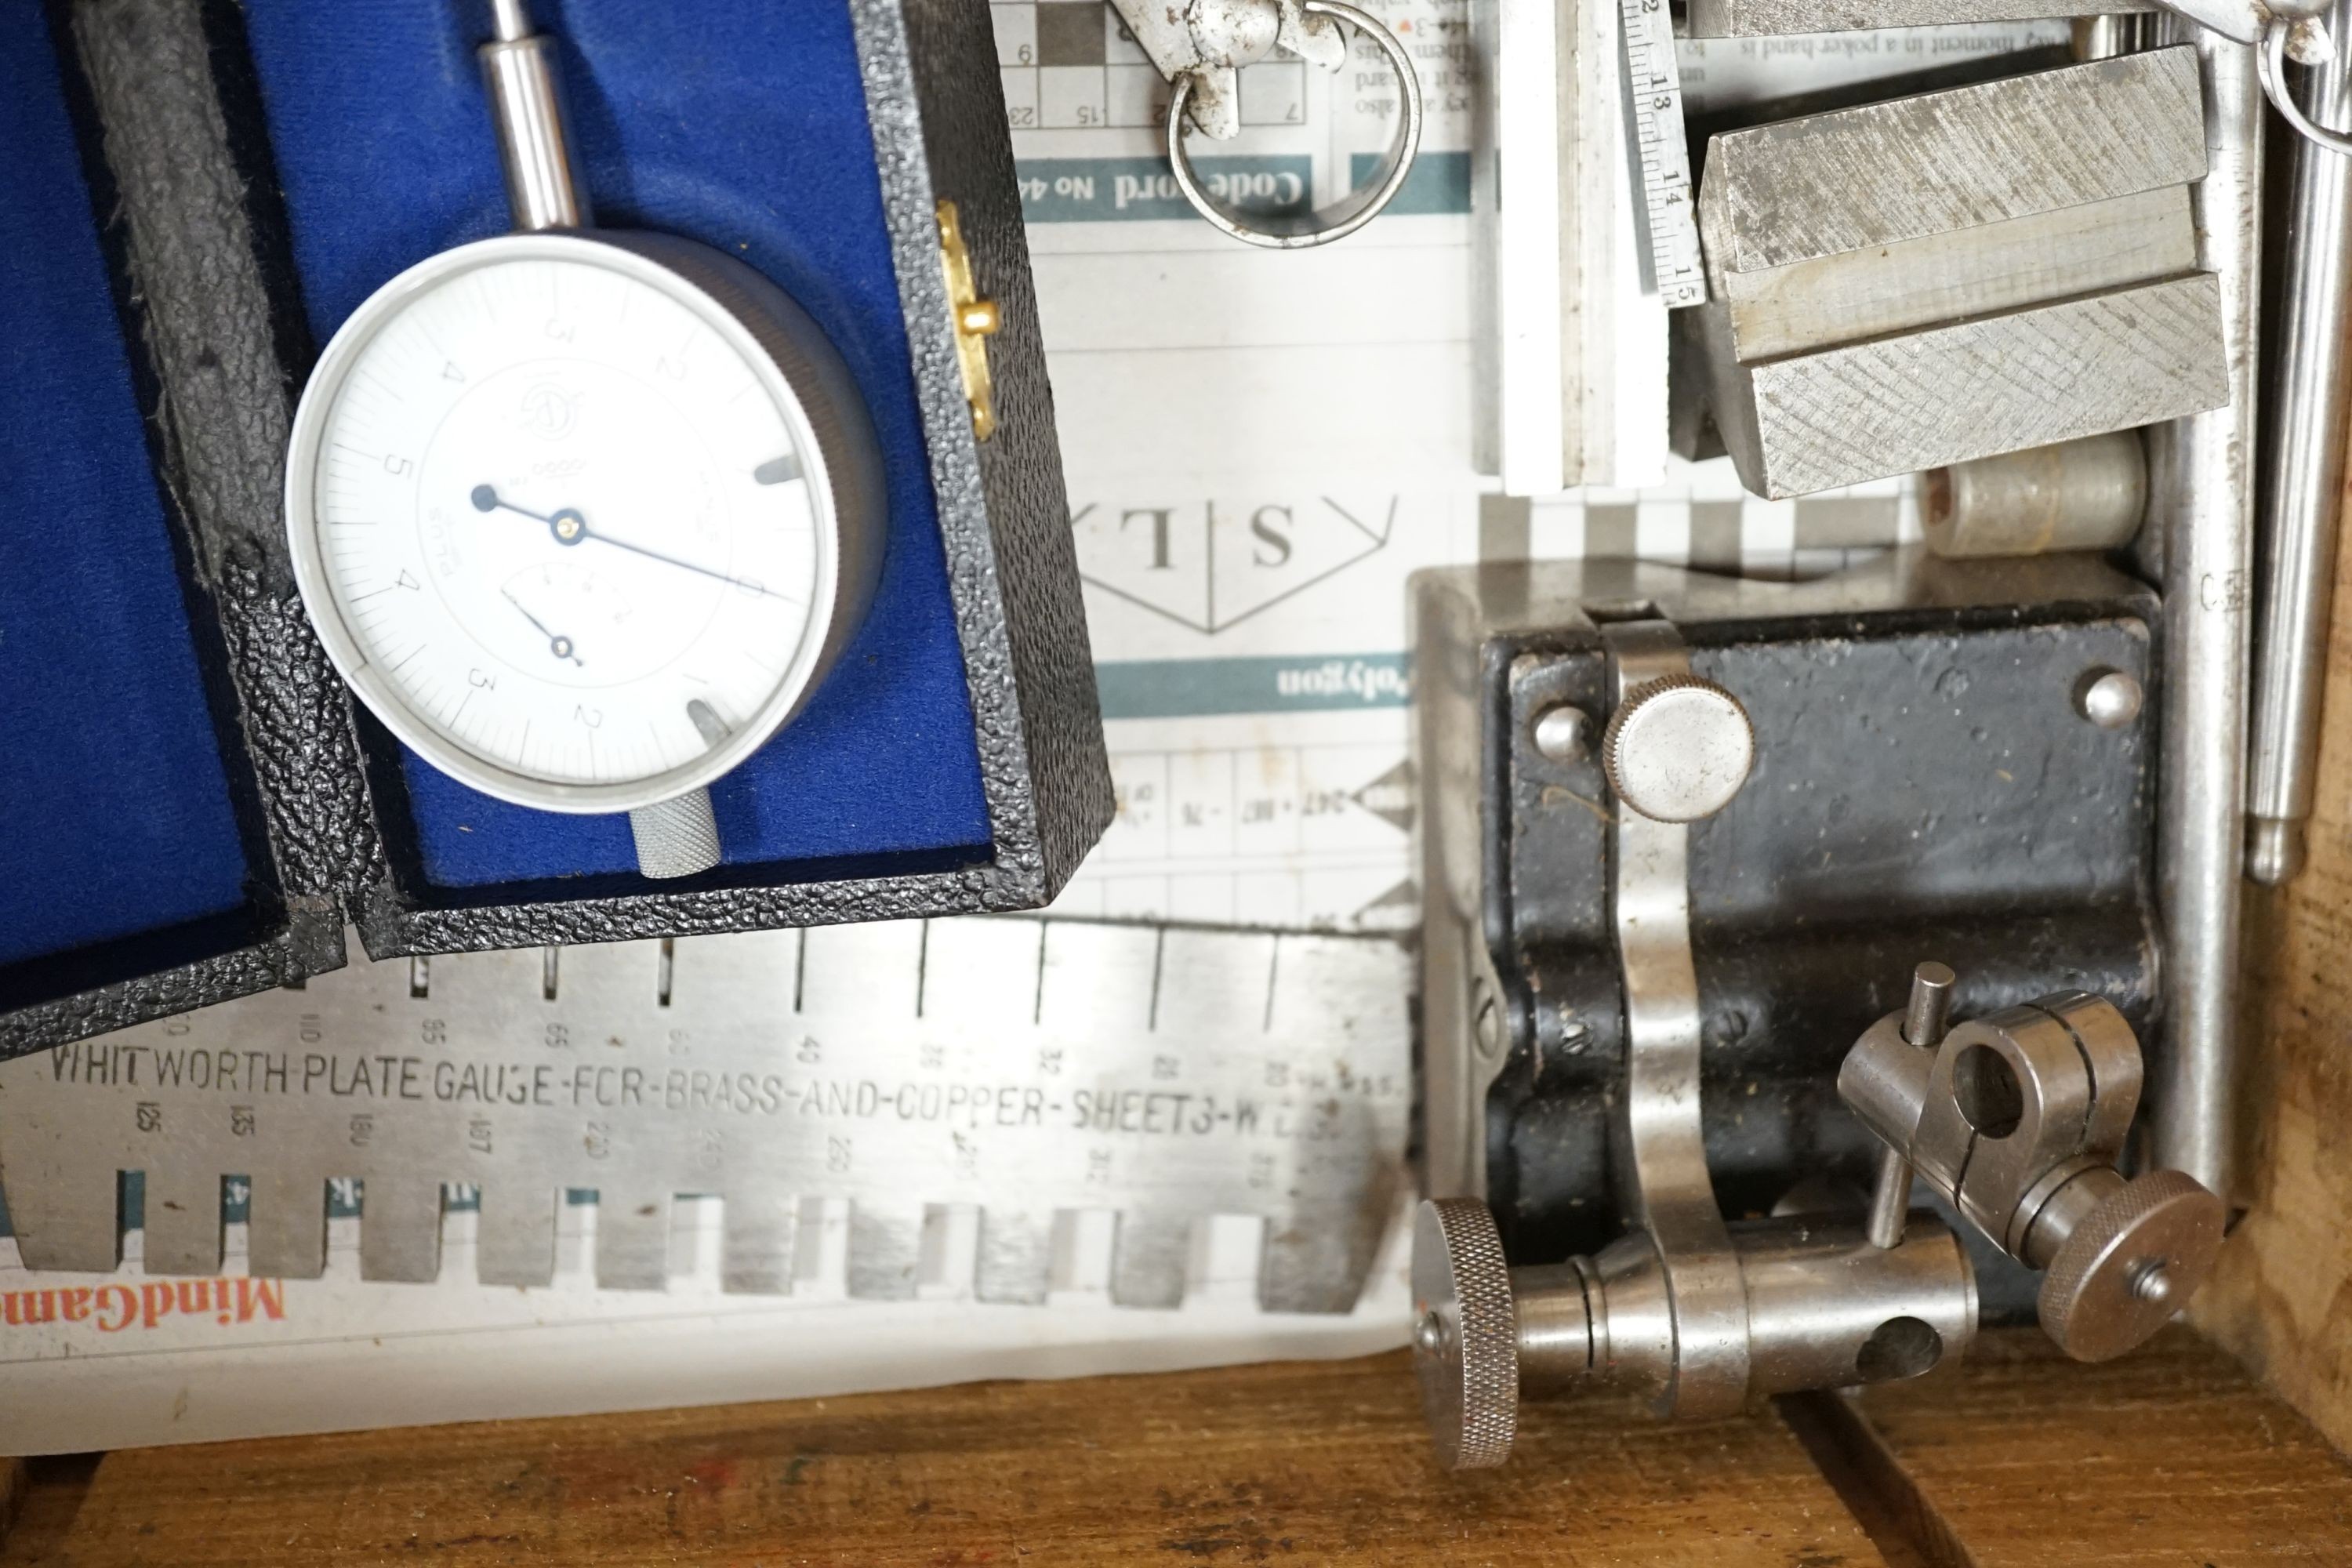 A collection of 20th century high precision metal measuring devices, including callipers, Compac dial micrometers, feeler gauges, wire gauges, a set square, steel cutting wheels etc